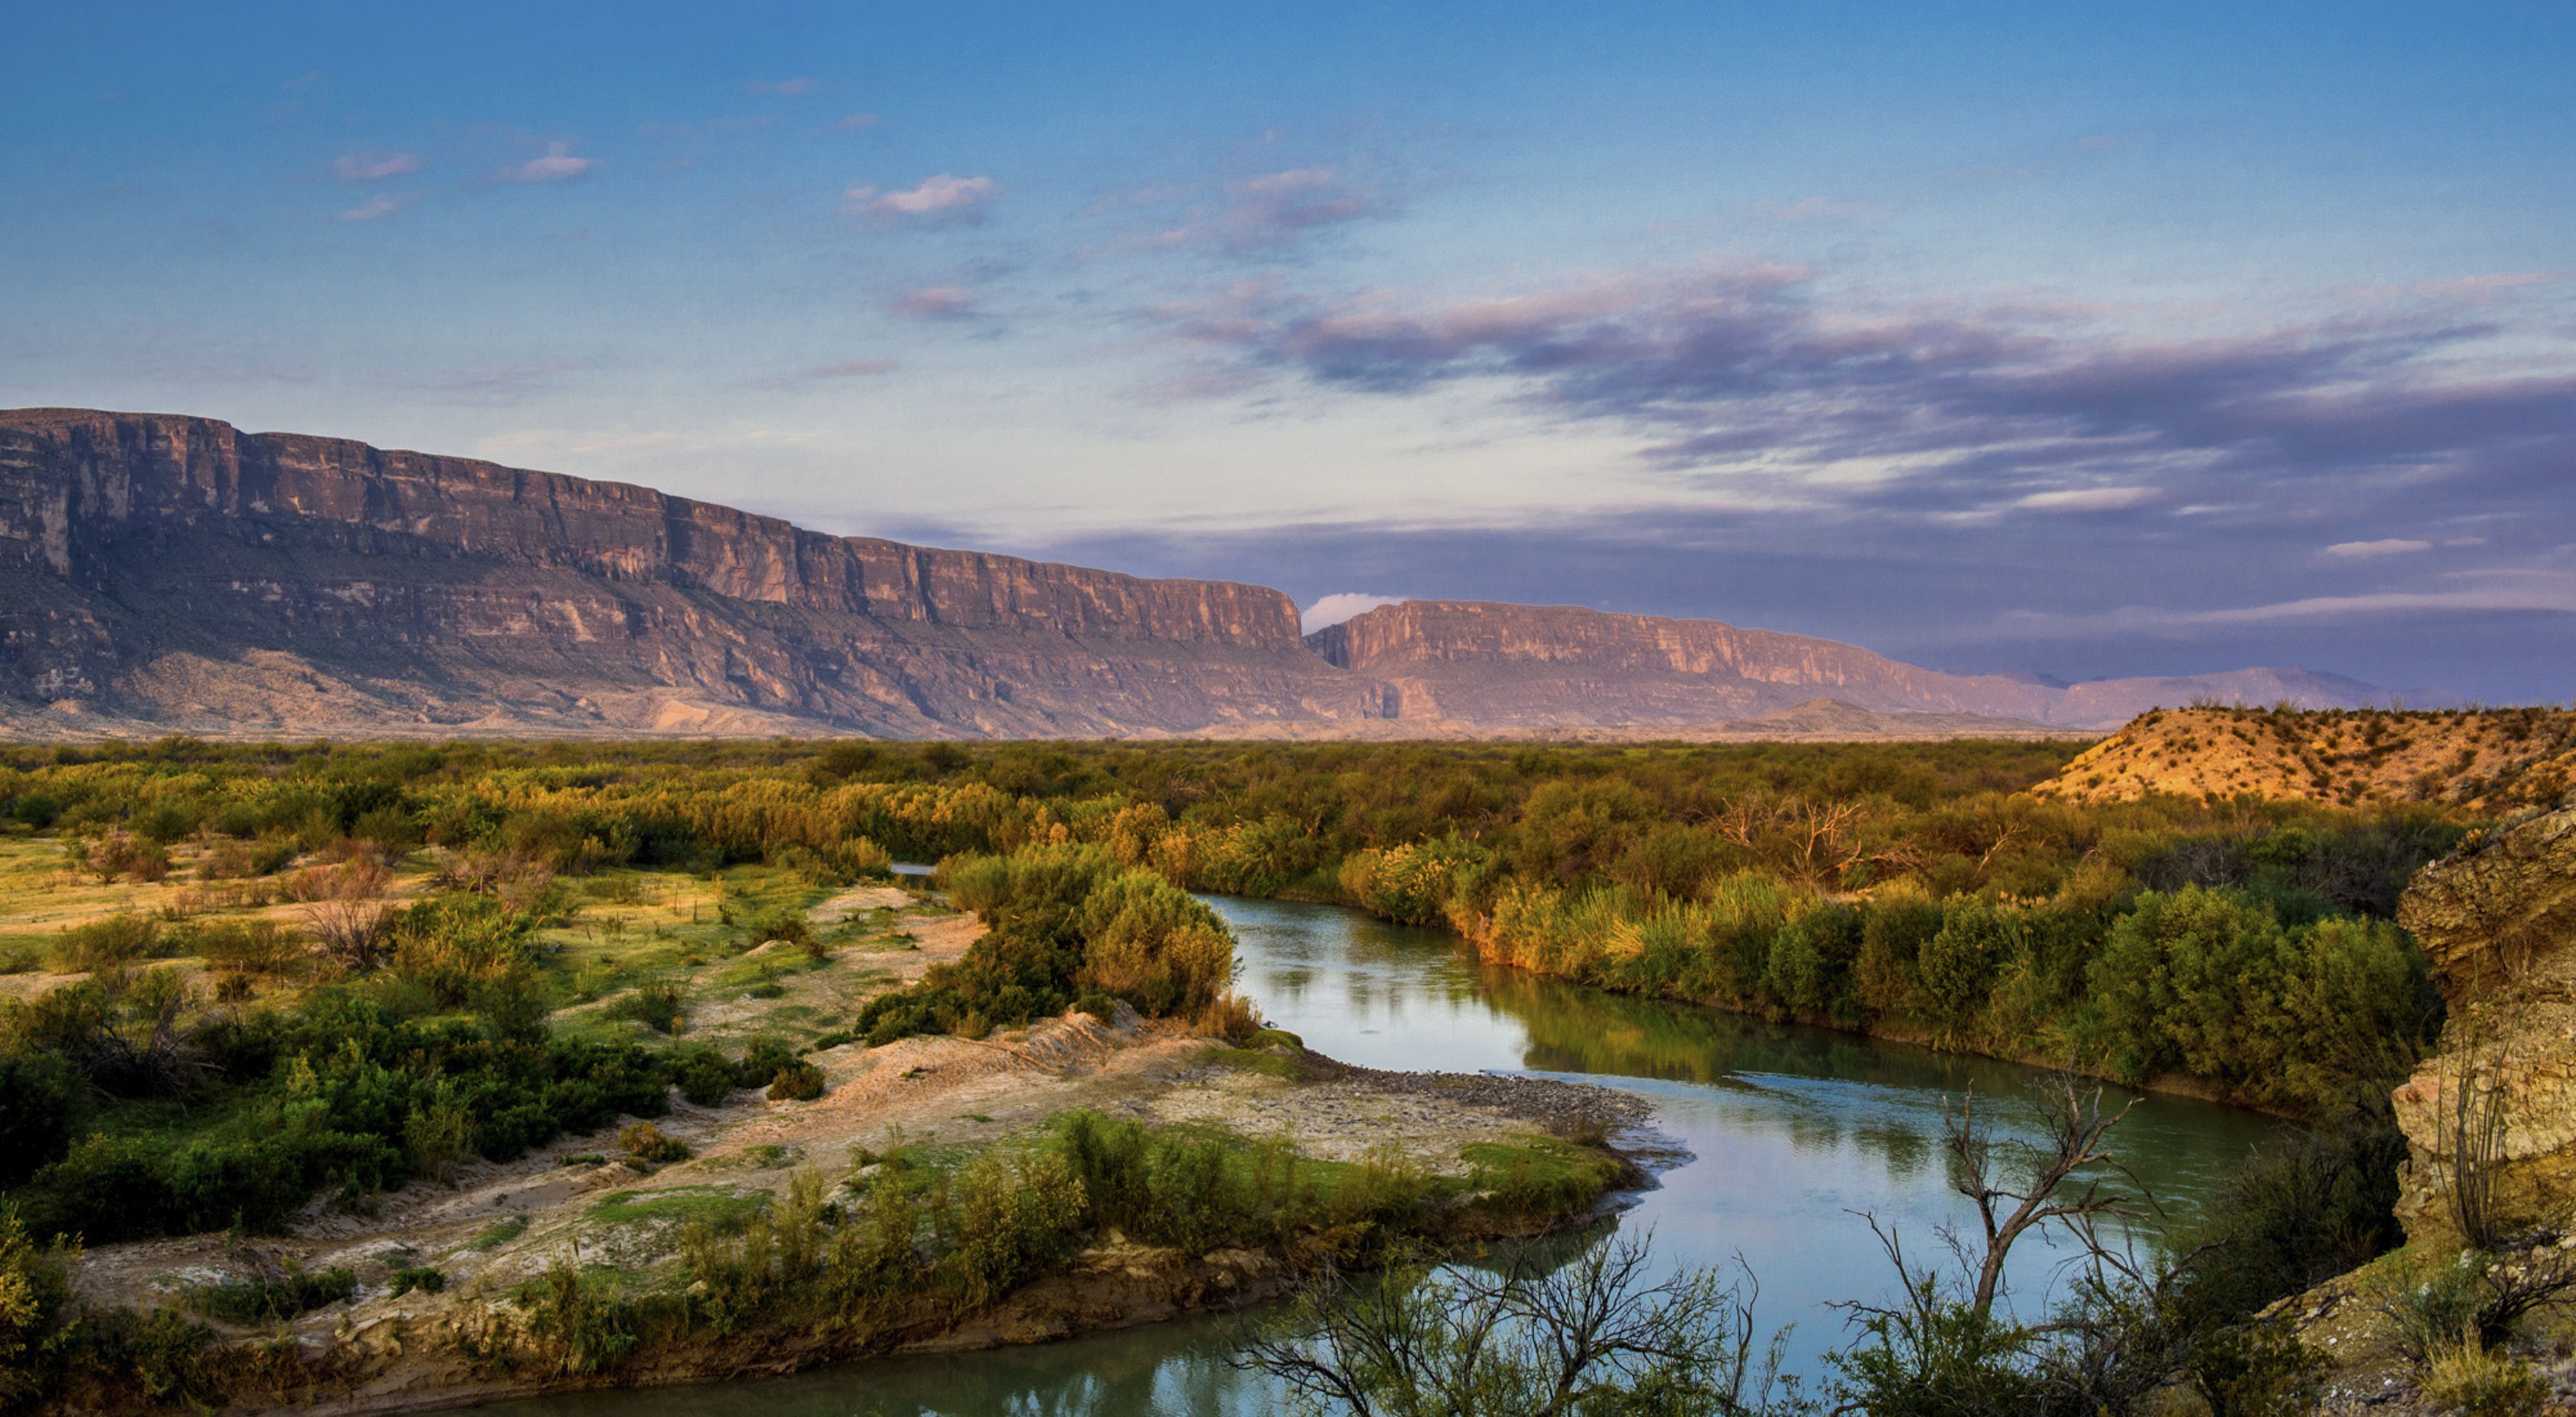 a view of the rio grande and a canyon in the background against a sunset sky